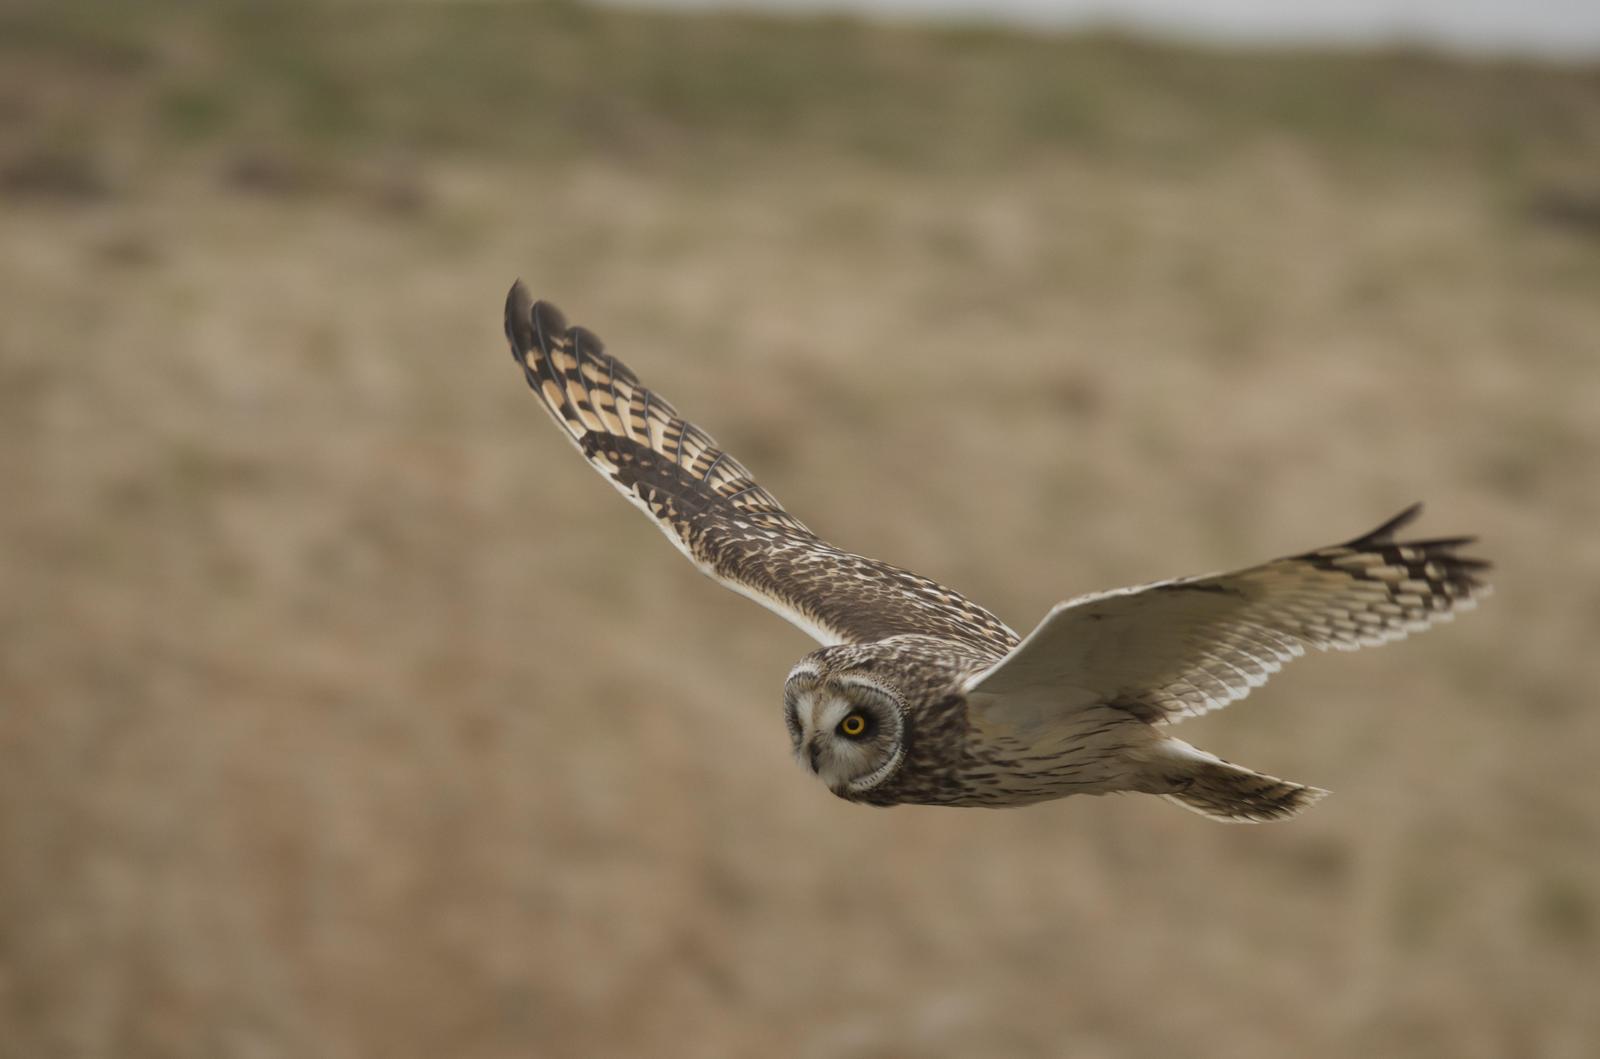 Short-eared Owl Photo by Anthony Bucci